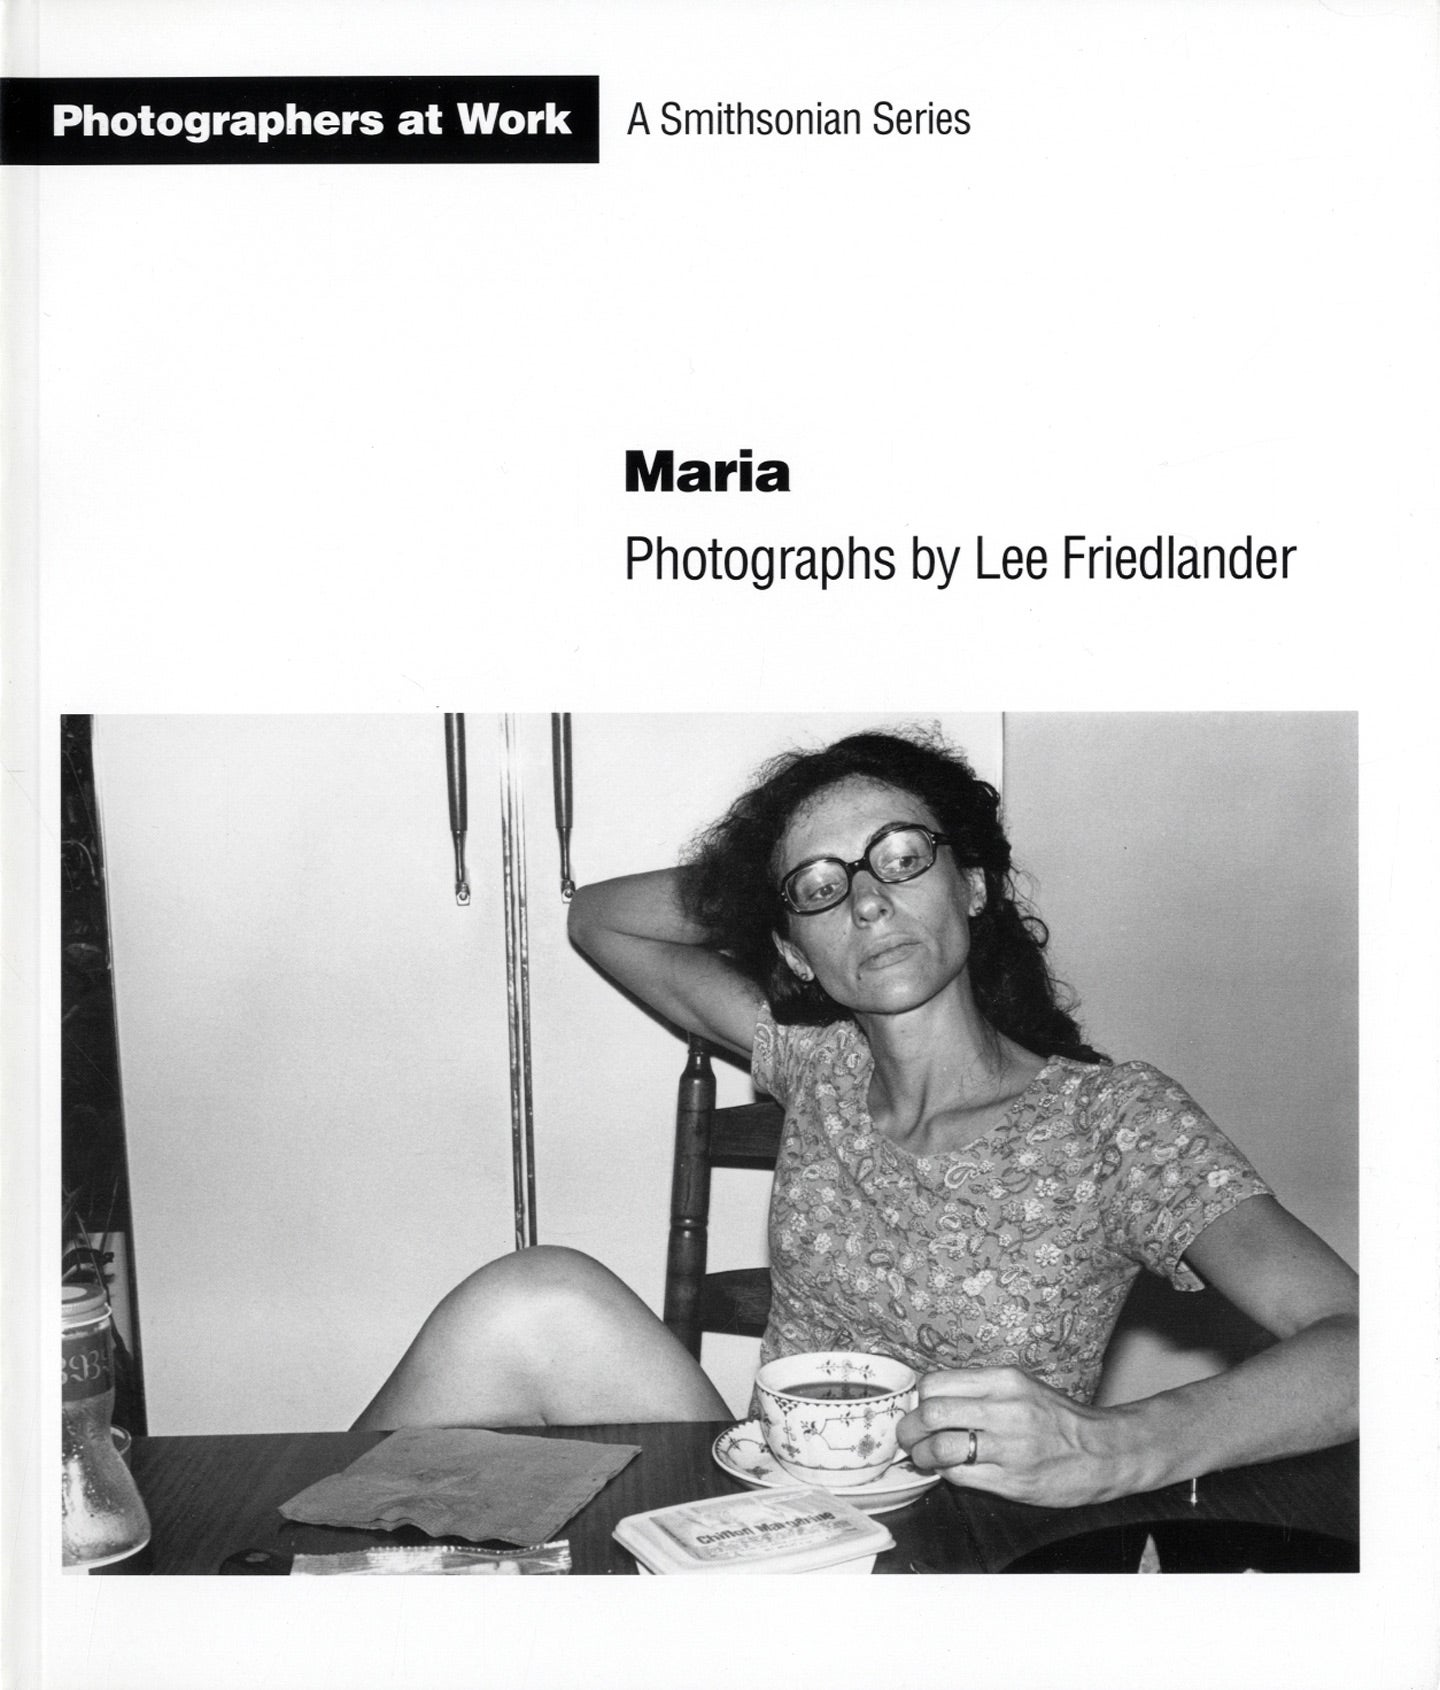 Maria: Photographs by Lee Friedlander (A Smithsonian Series) [SIGNED]